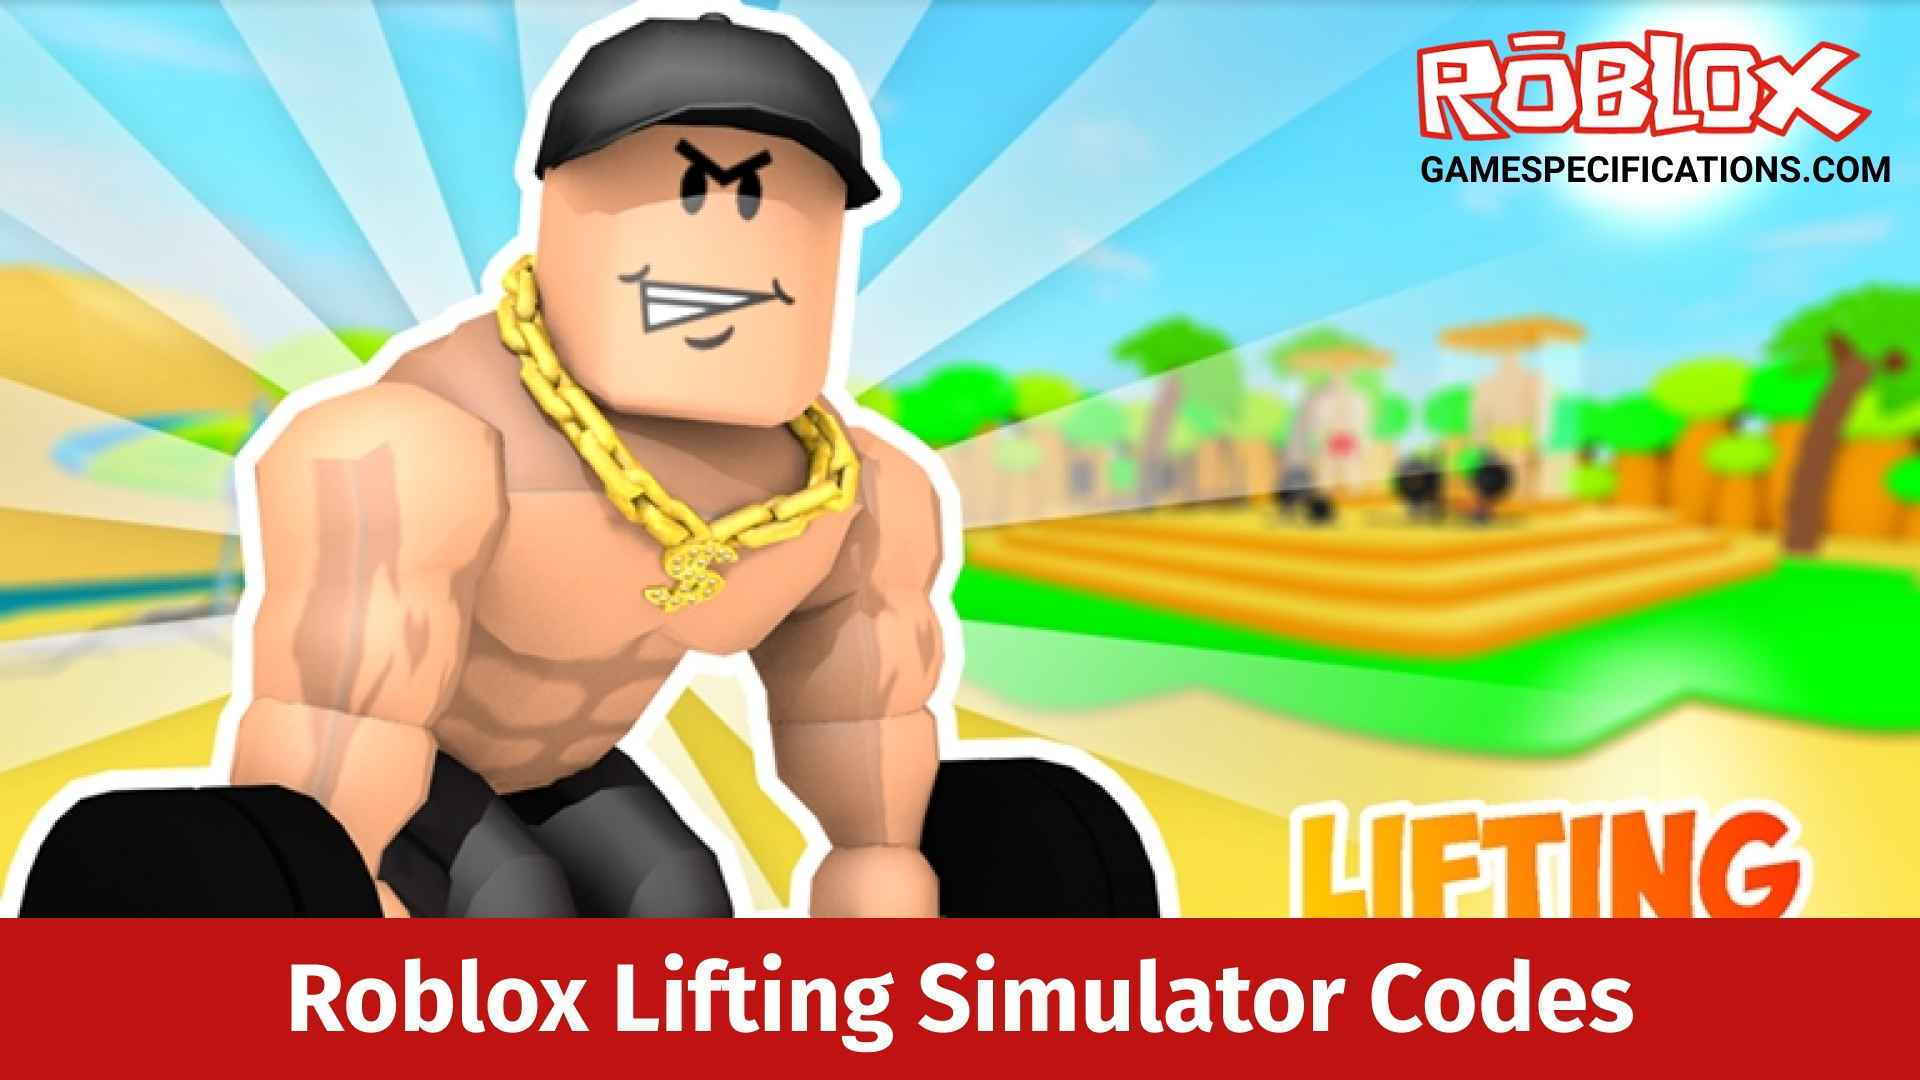 Roblox Lifting Simulator Codes July 2021 Game Specifications - how to rebirth in roblox strongman simulator